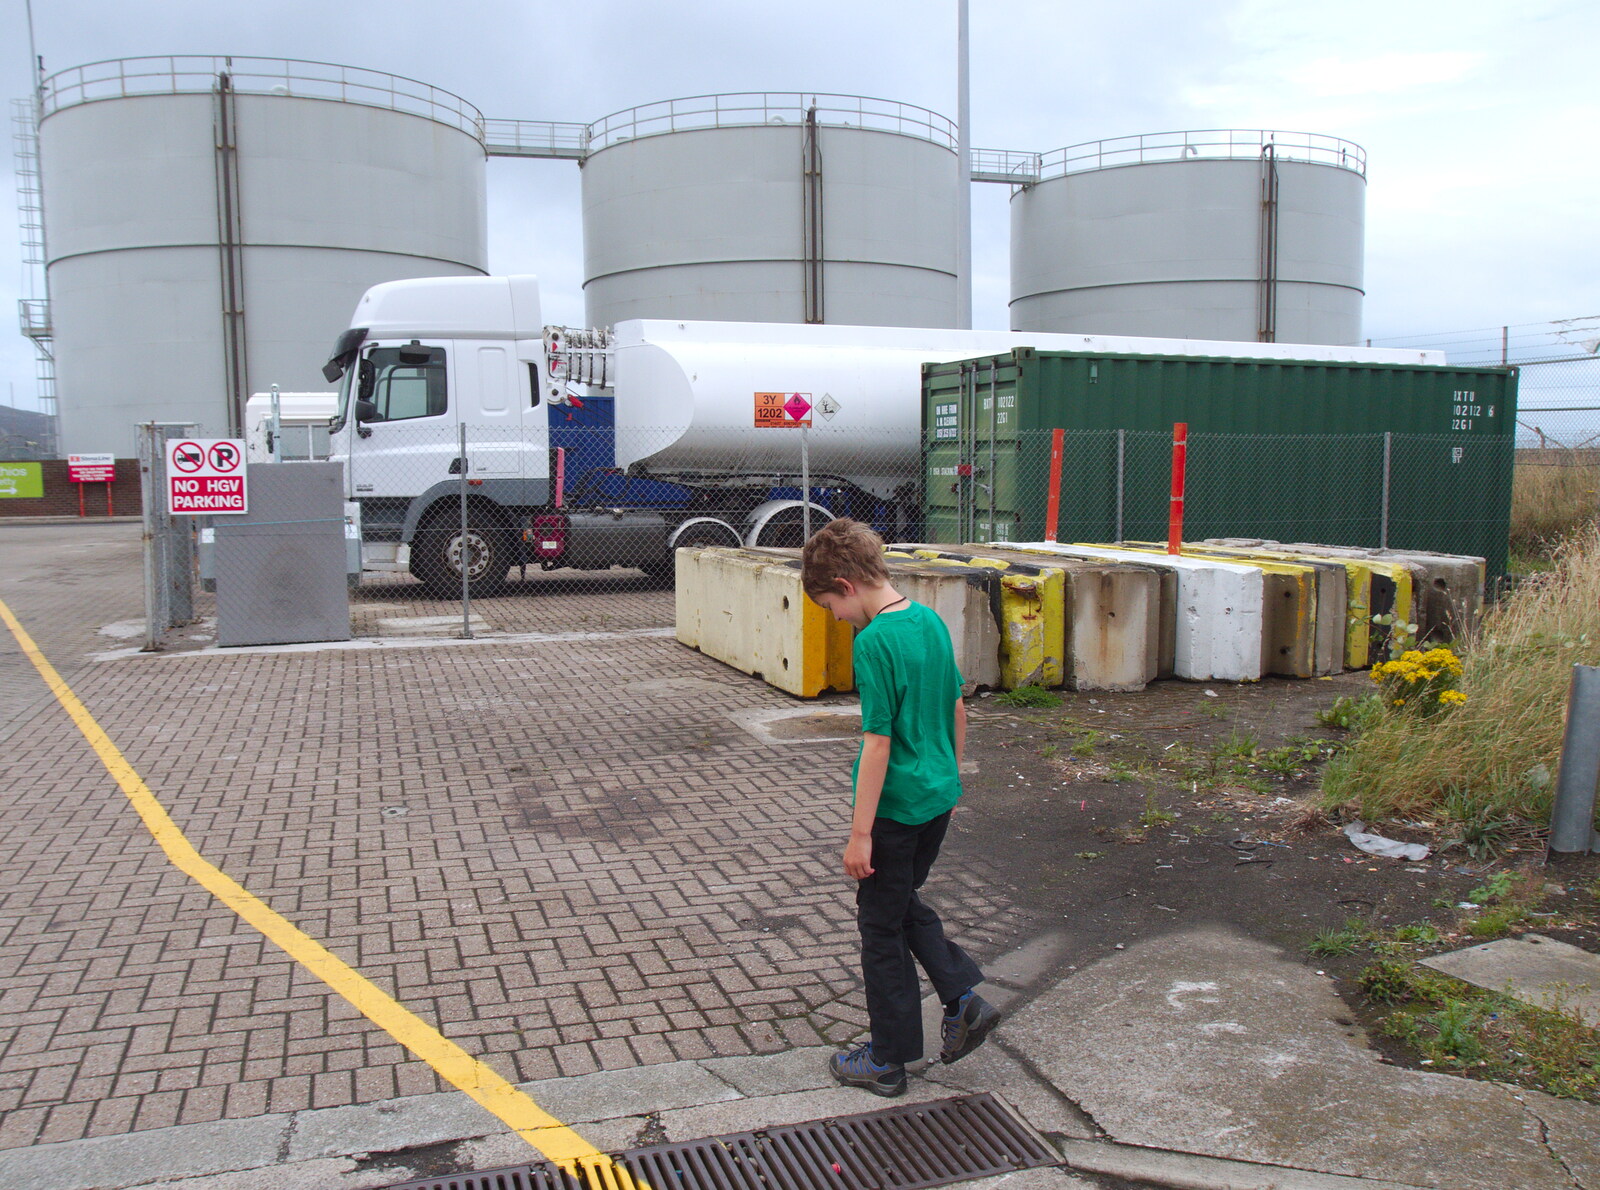 Fred roams around near some oil tanks from The Summer Trip to Ireland, Monkstown, Co. Dublin, Ireland - 9th August 2019